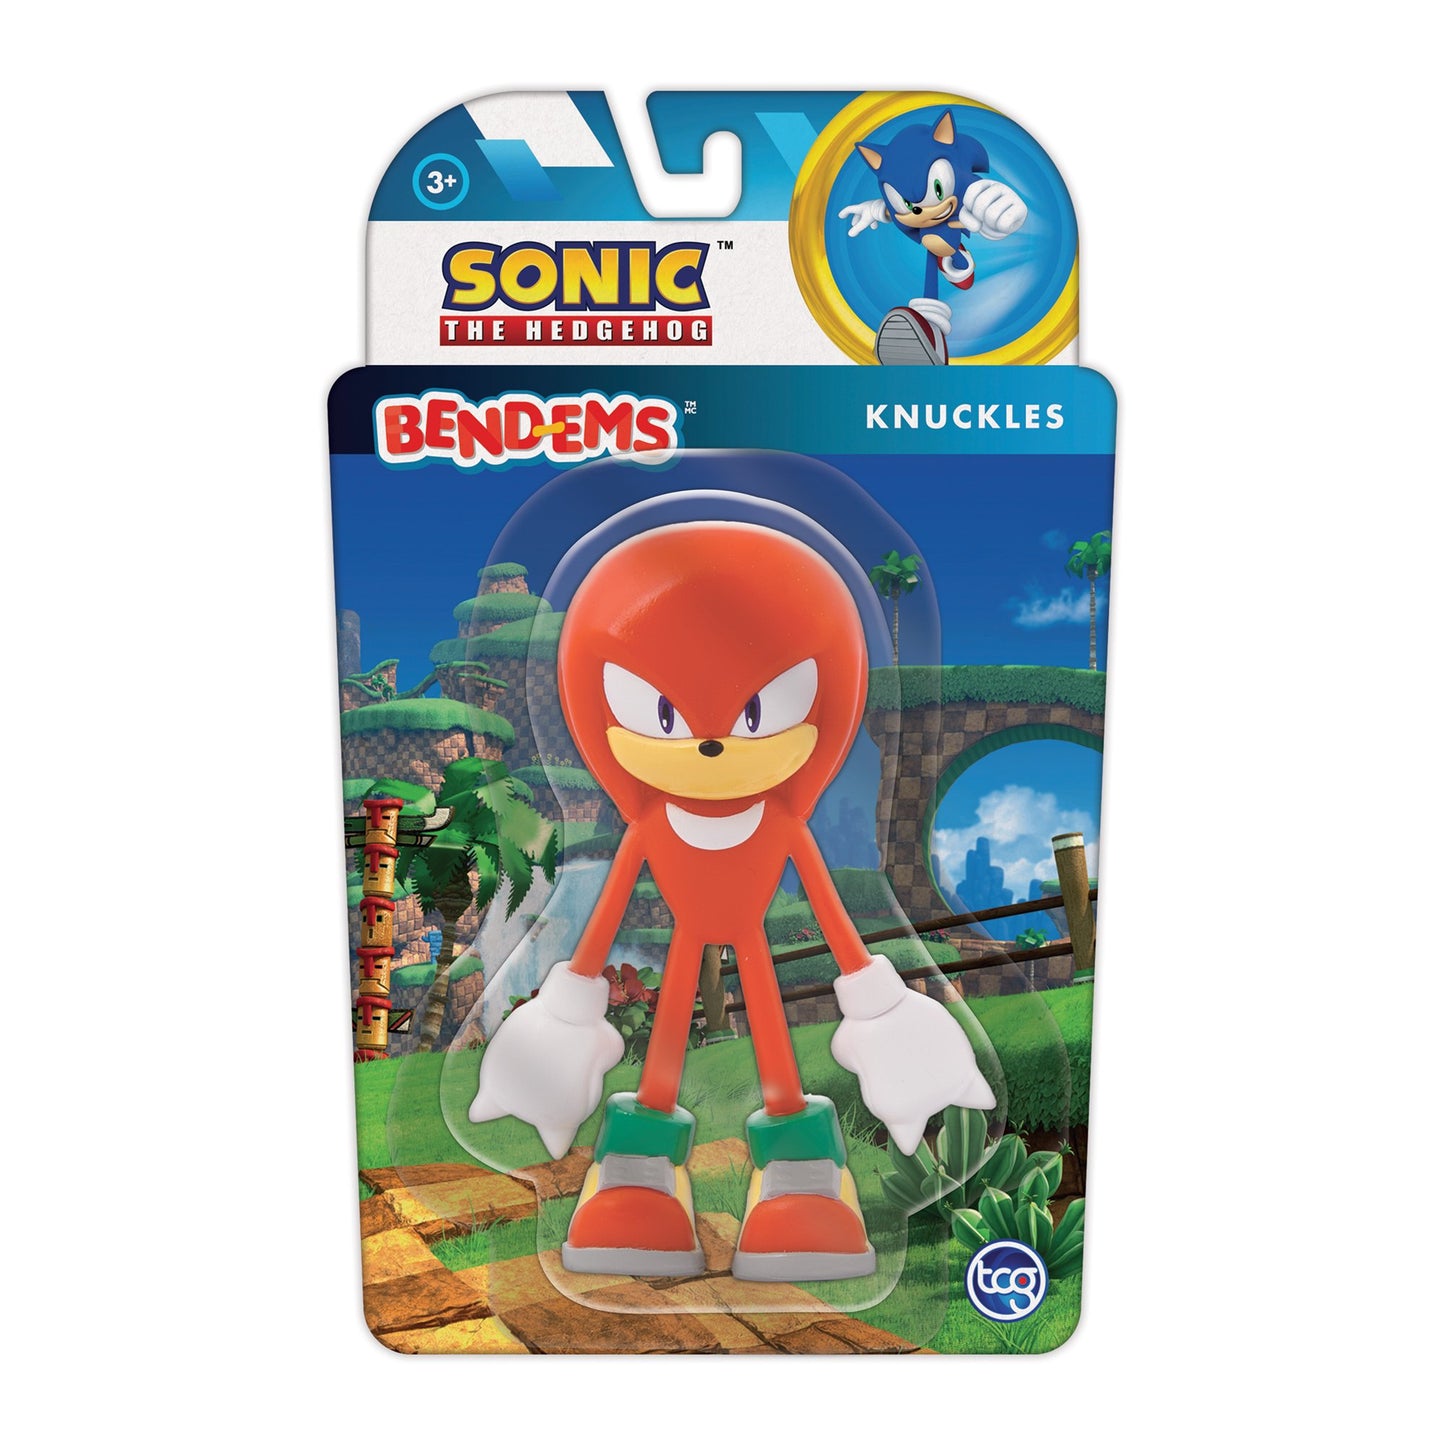 Knuckles from Sonic The Hedeghog bendable figure